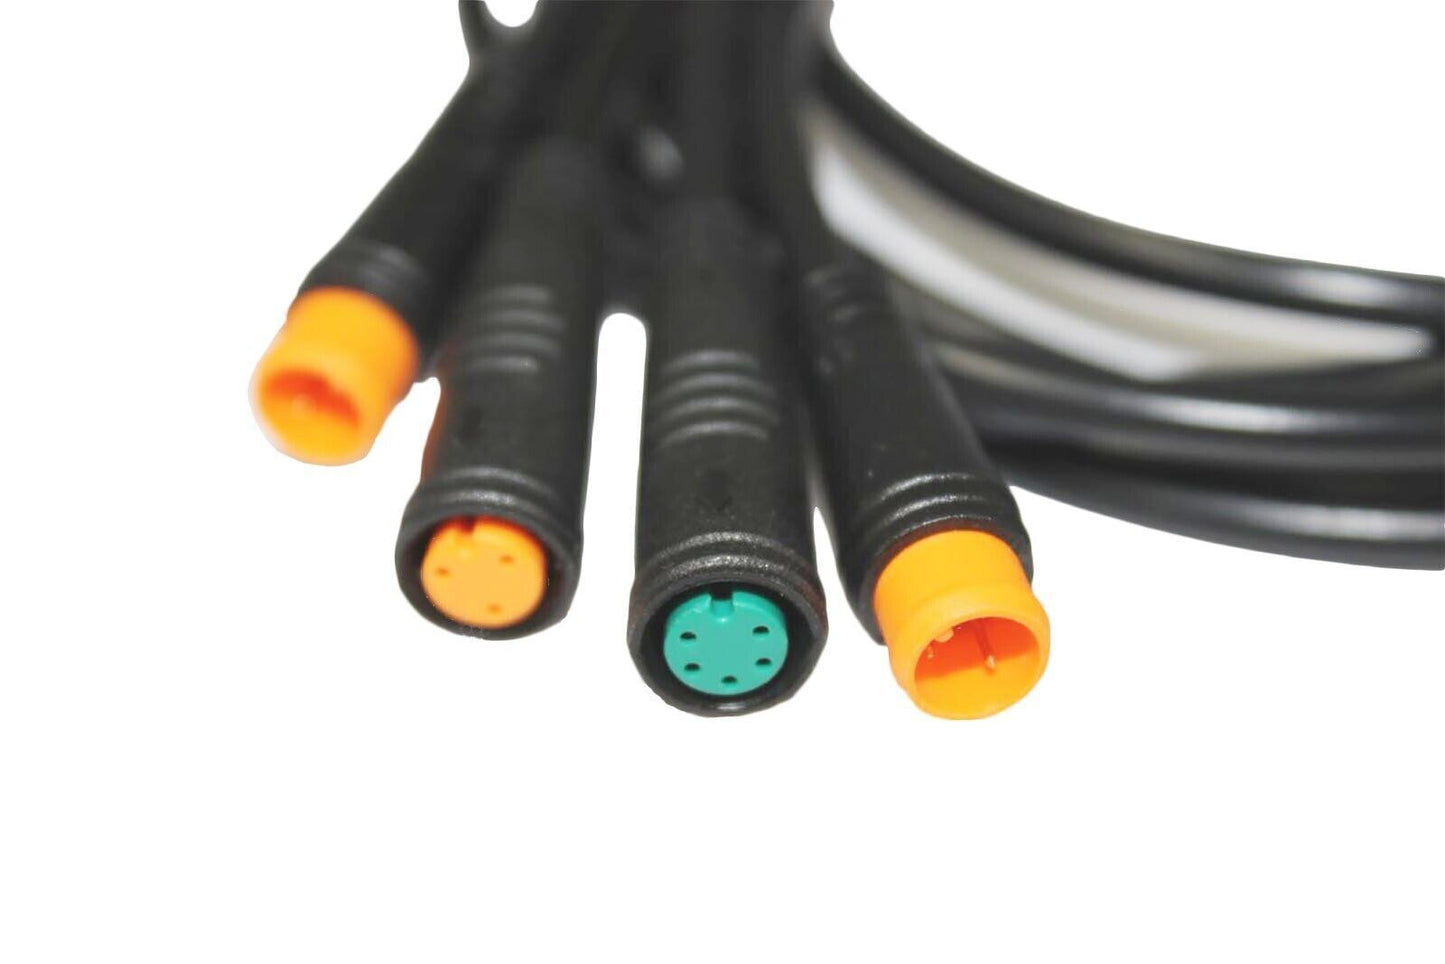 USB-Type C 1 to 4 Main Cable Waterproof Cable for Electric Bike E-Bike